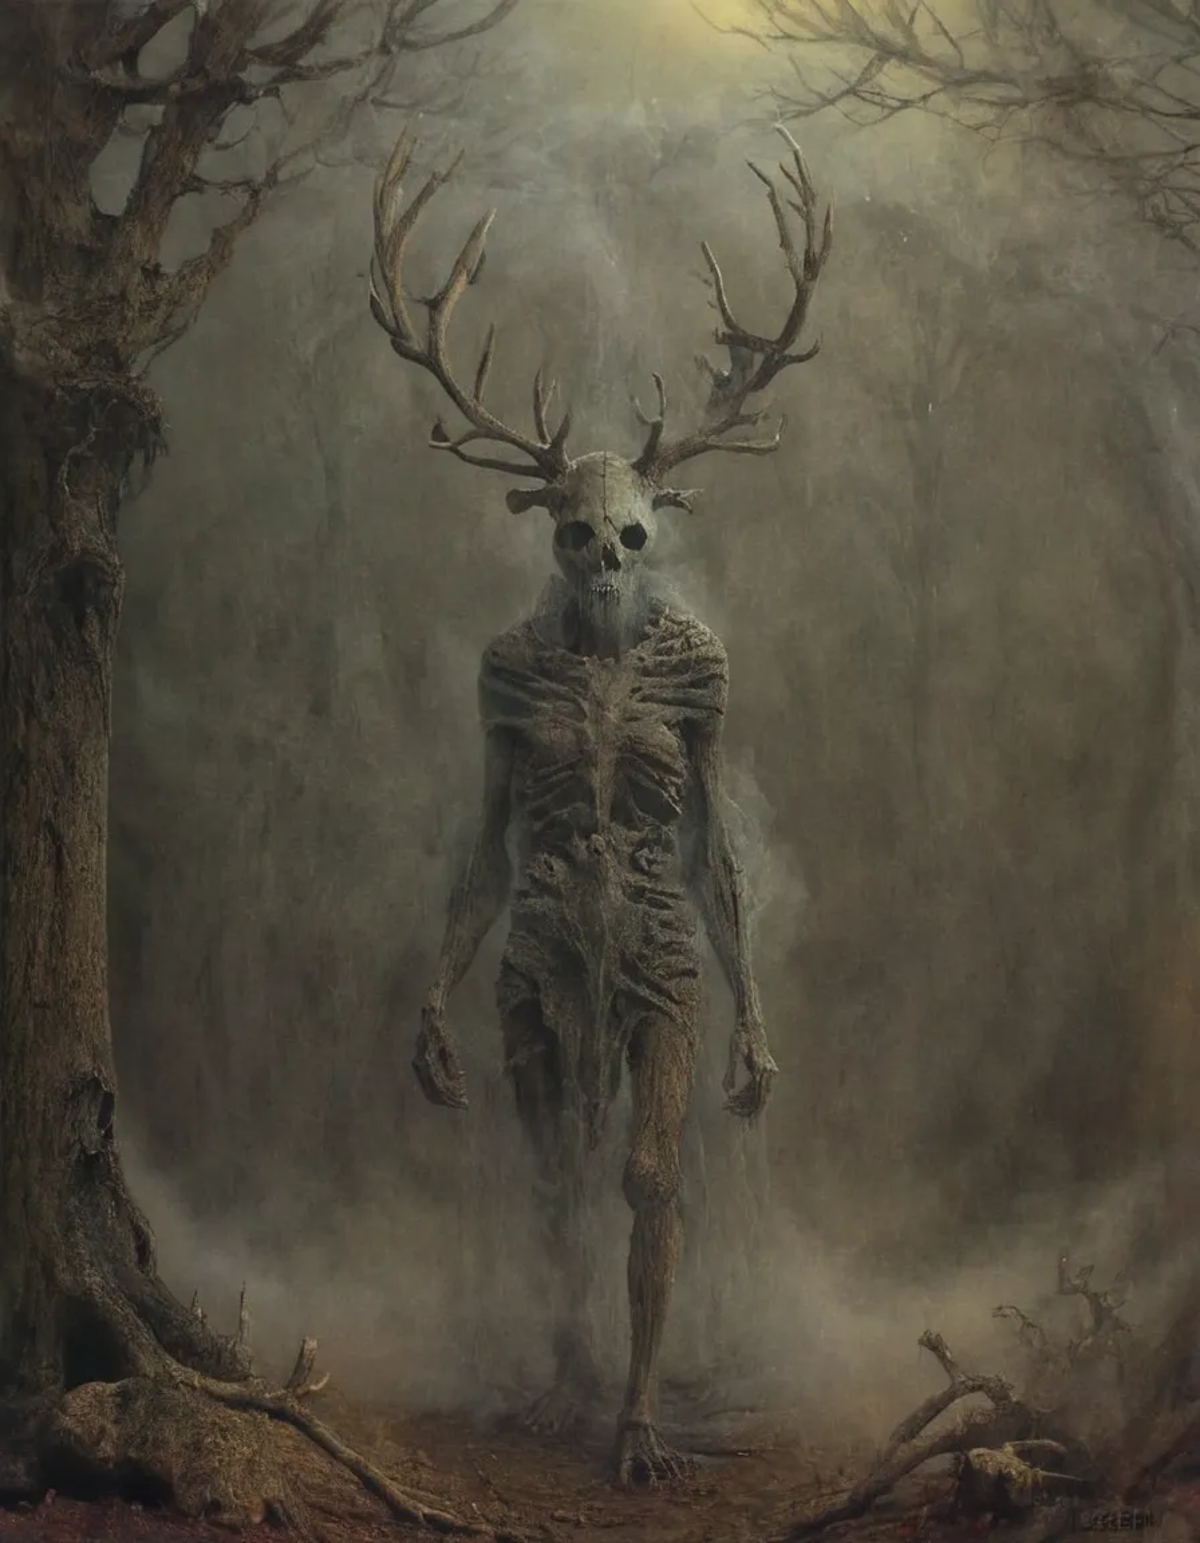 A skeletal figure with antlers in a murky forest.